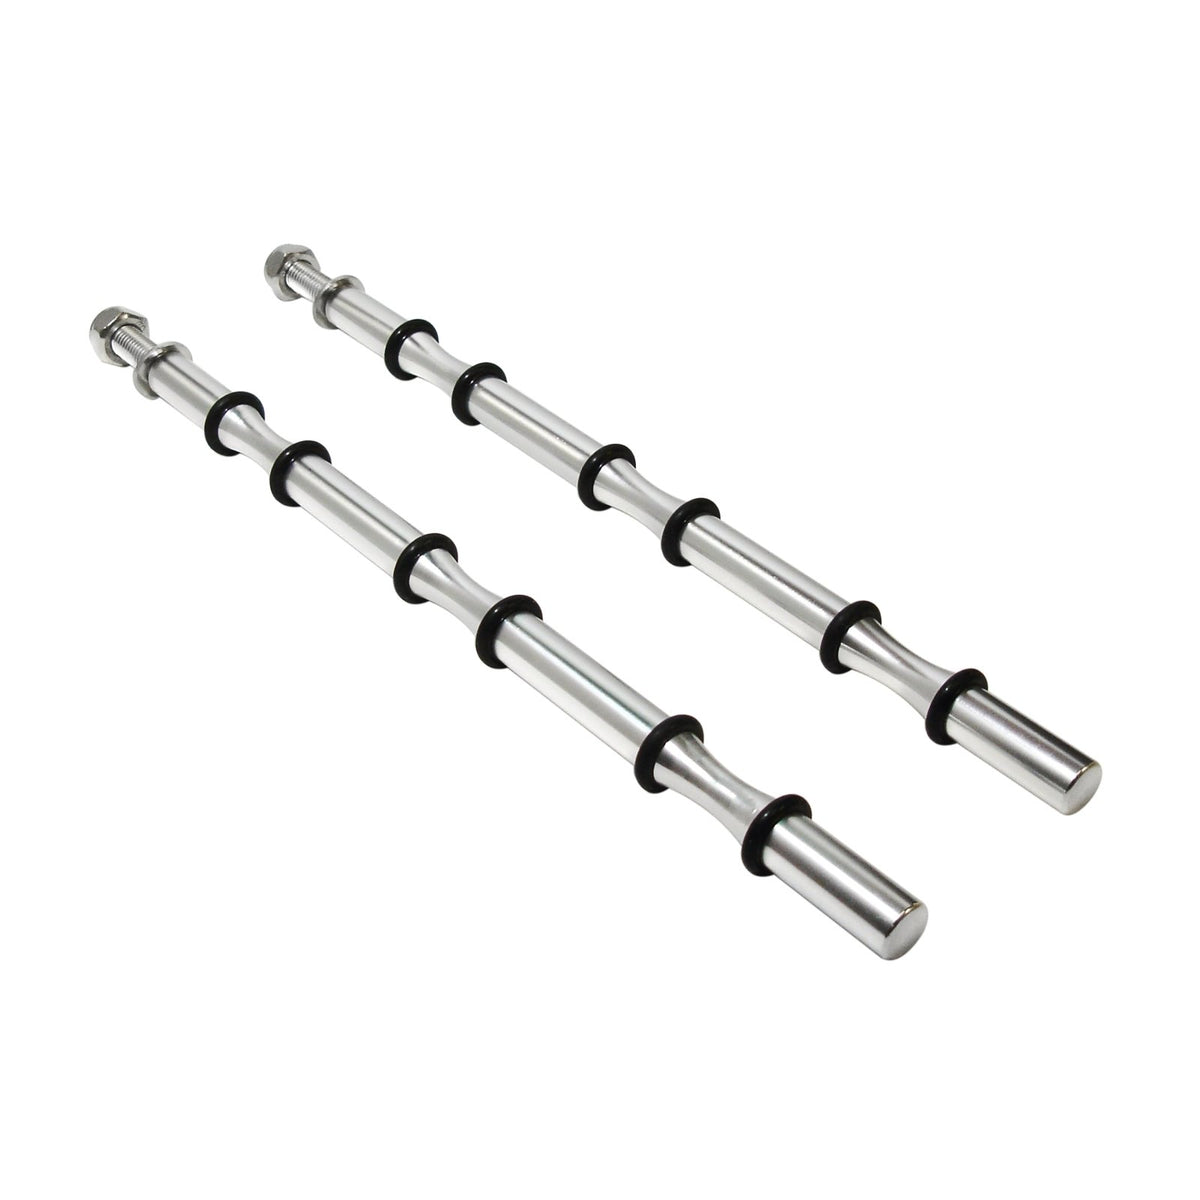 Vinotemp EP - PEG3 Epicureanist Secure Hold Wine Pegs, 3 Bottles Deep, in Satin Nickel (EP - PEG3A) - TheChefStore.Com